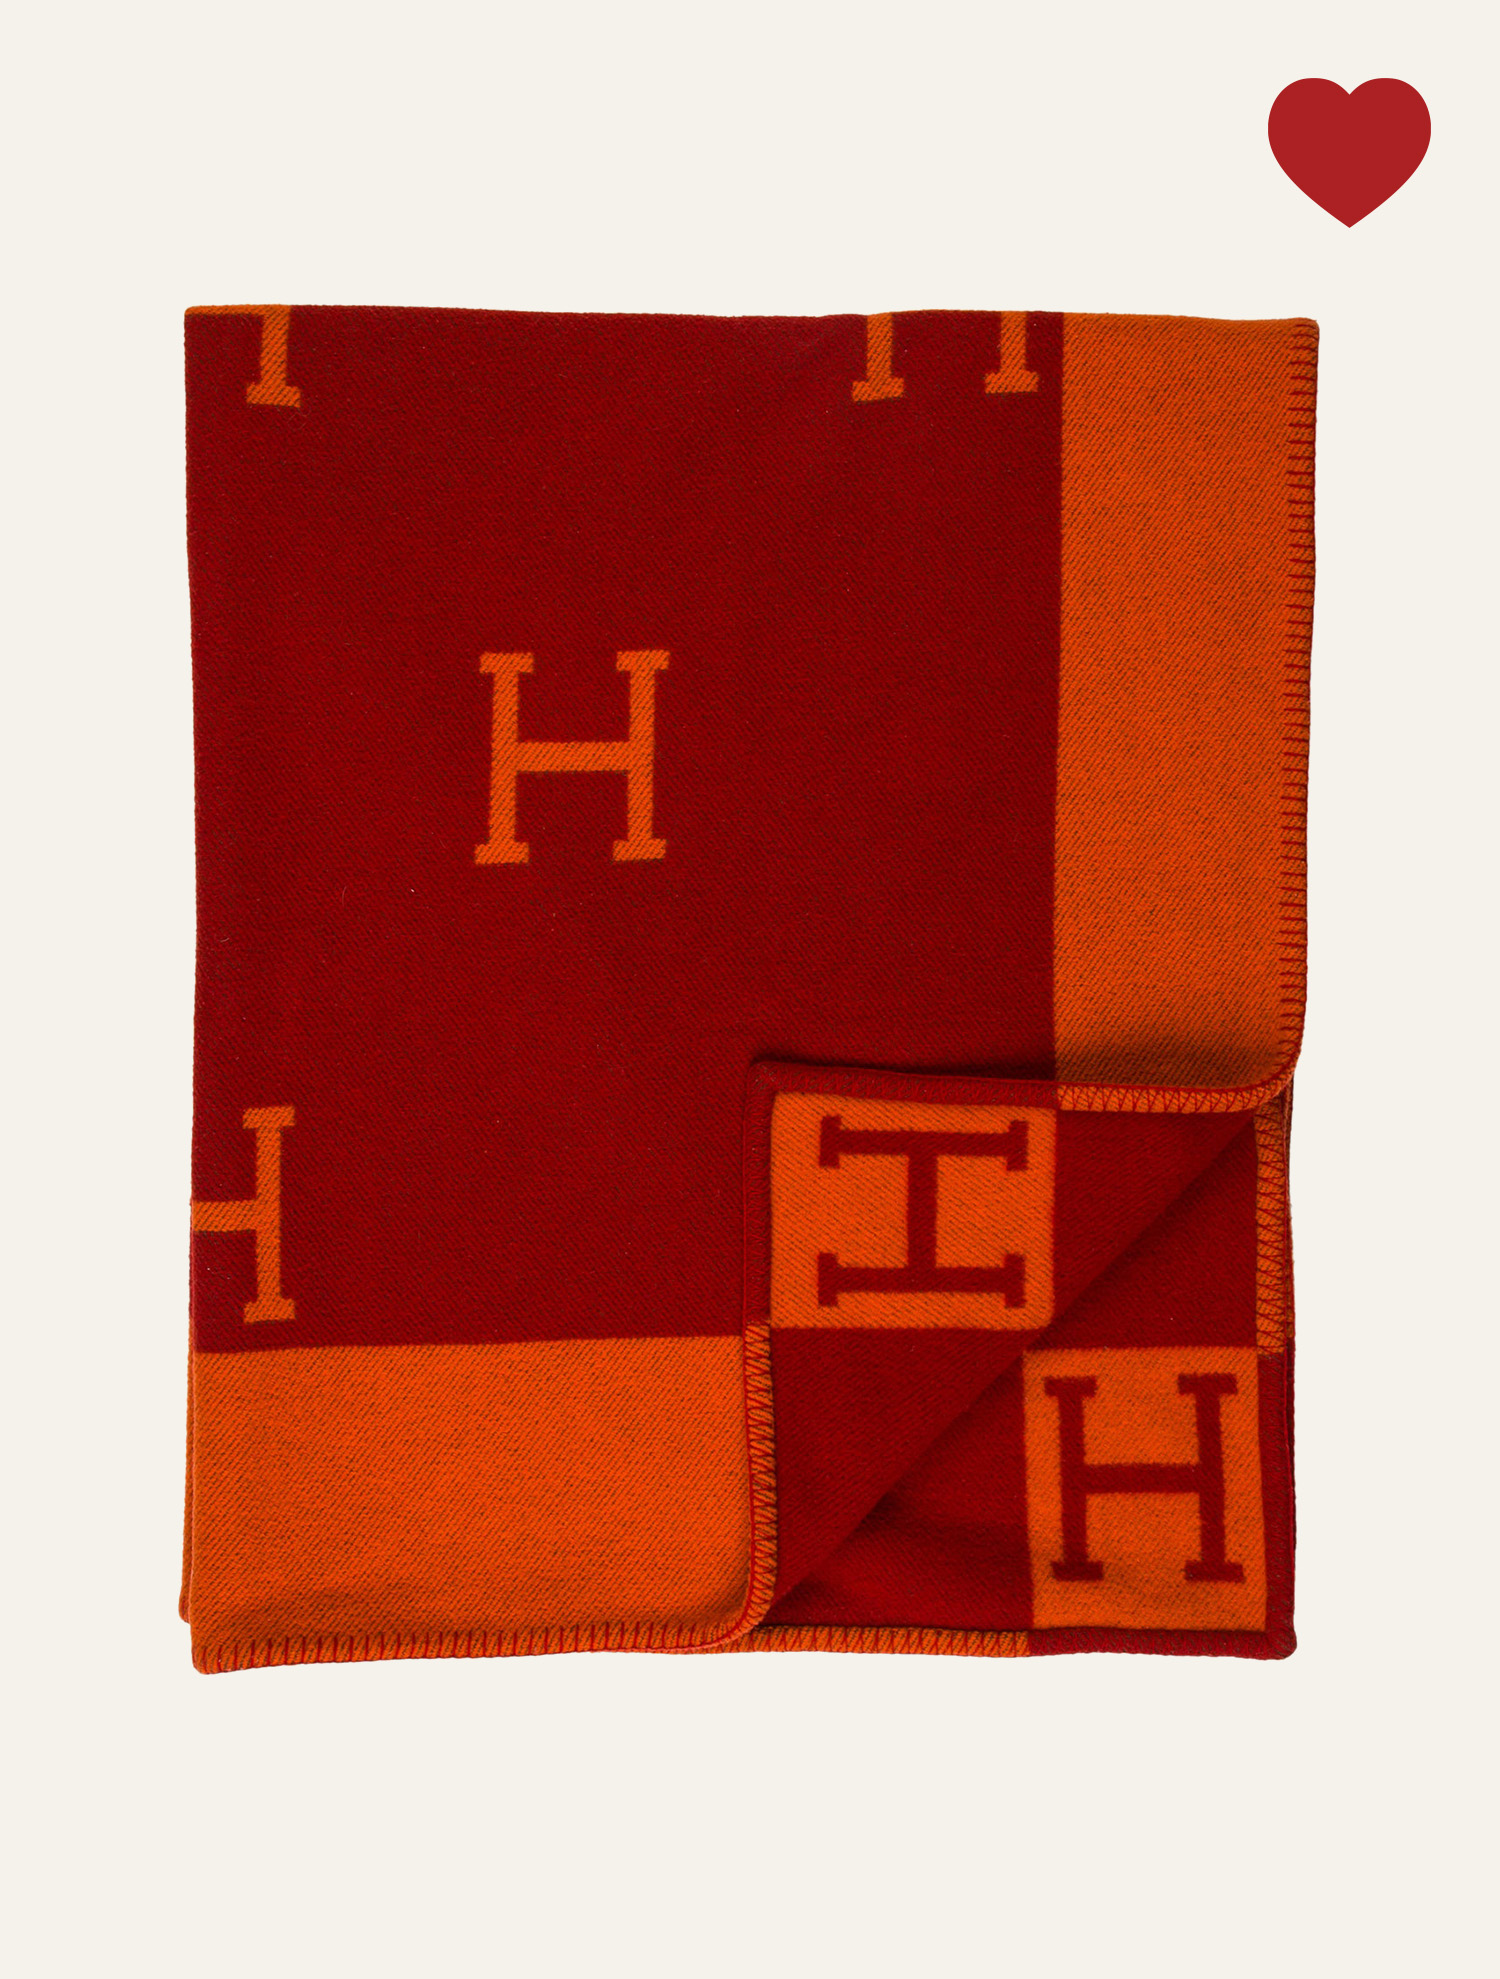 Resale Report Products-Hermes